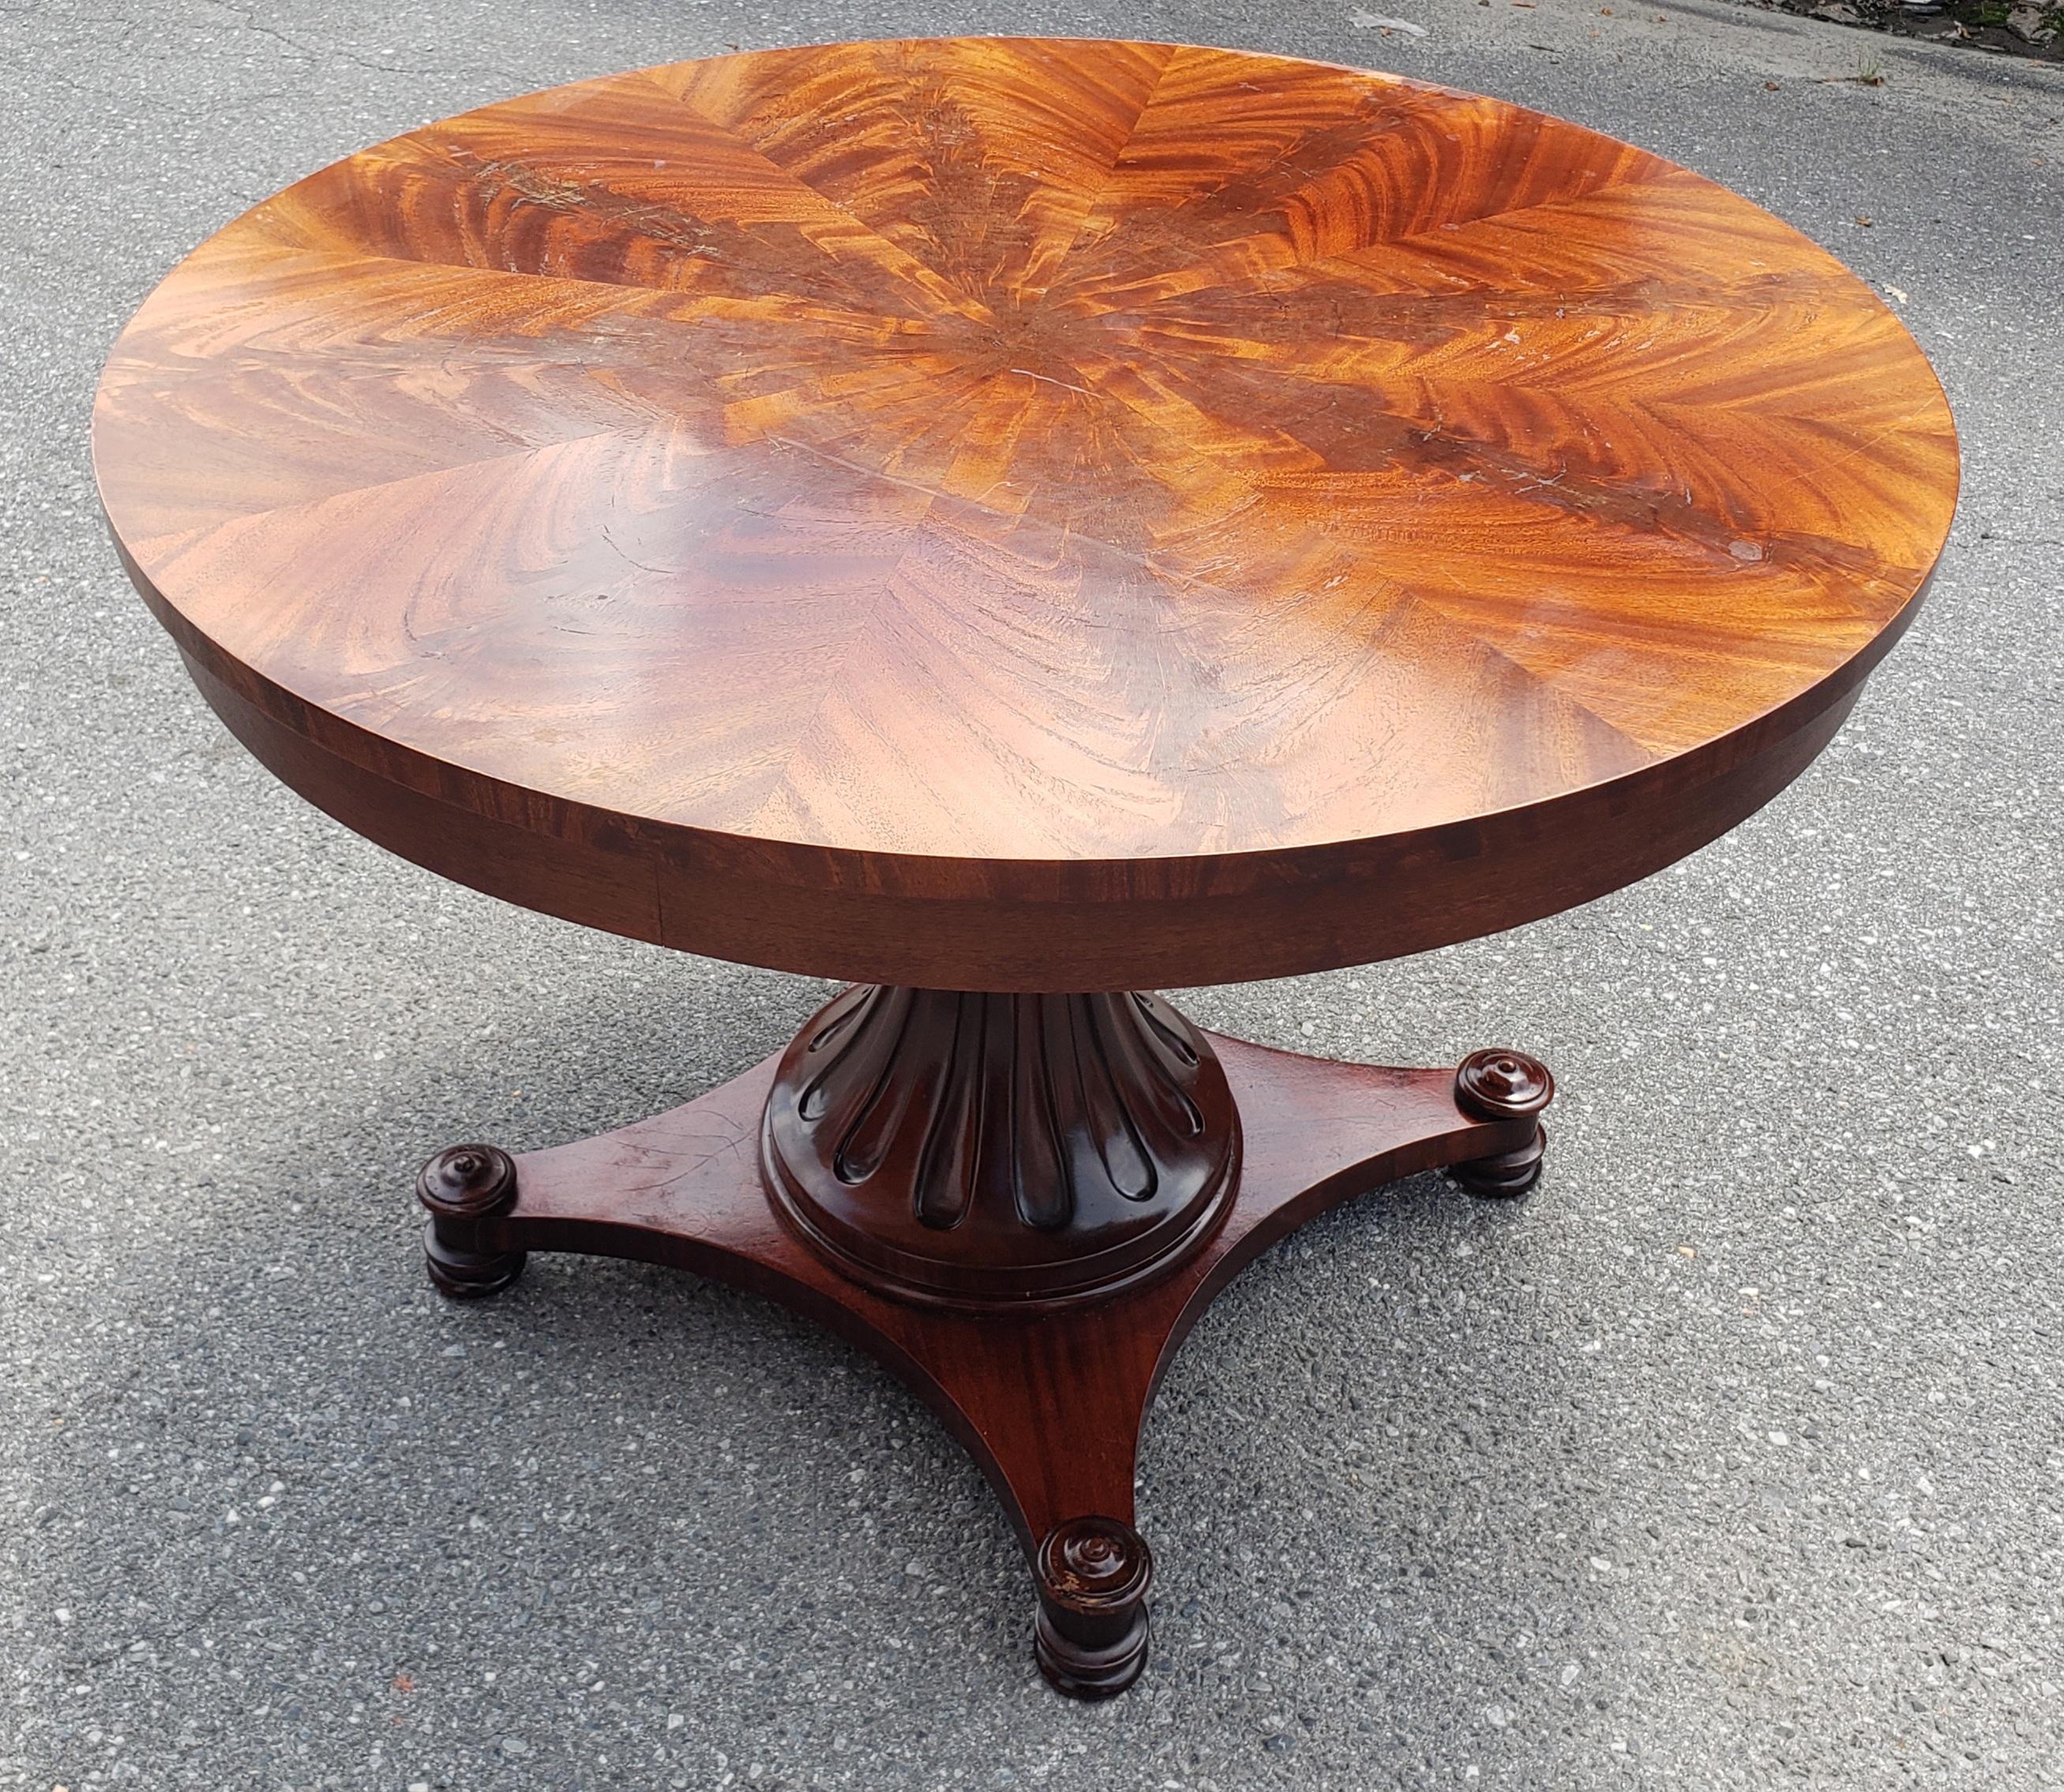 Stained Late 20th Century Swirl Mahogany Breakfast Table or Center Table